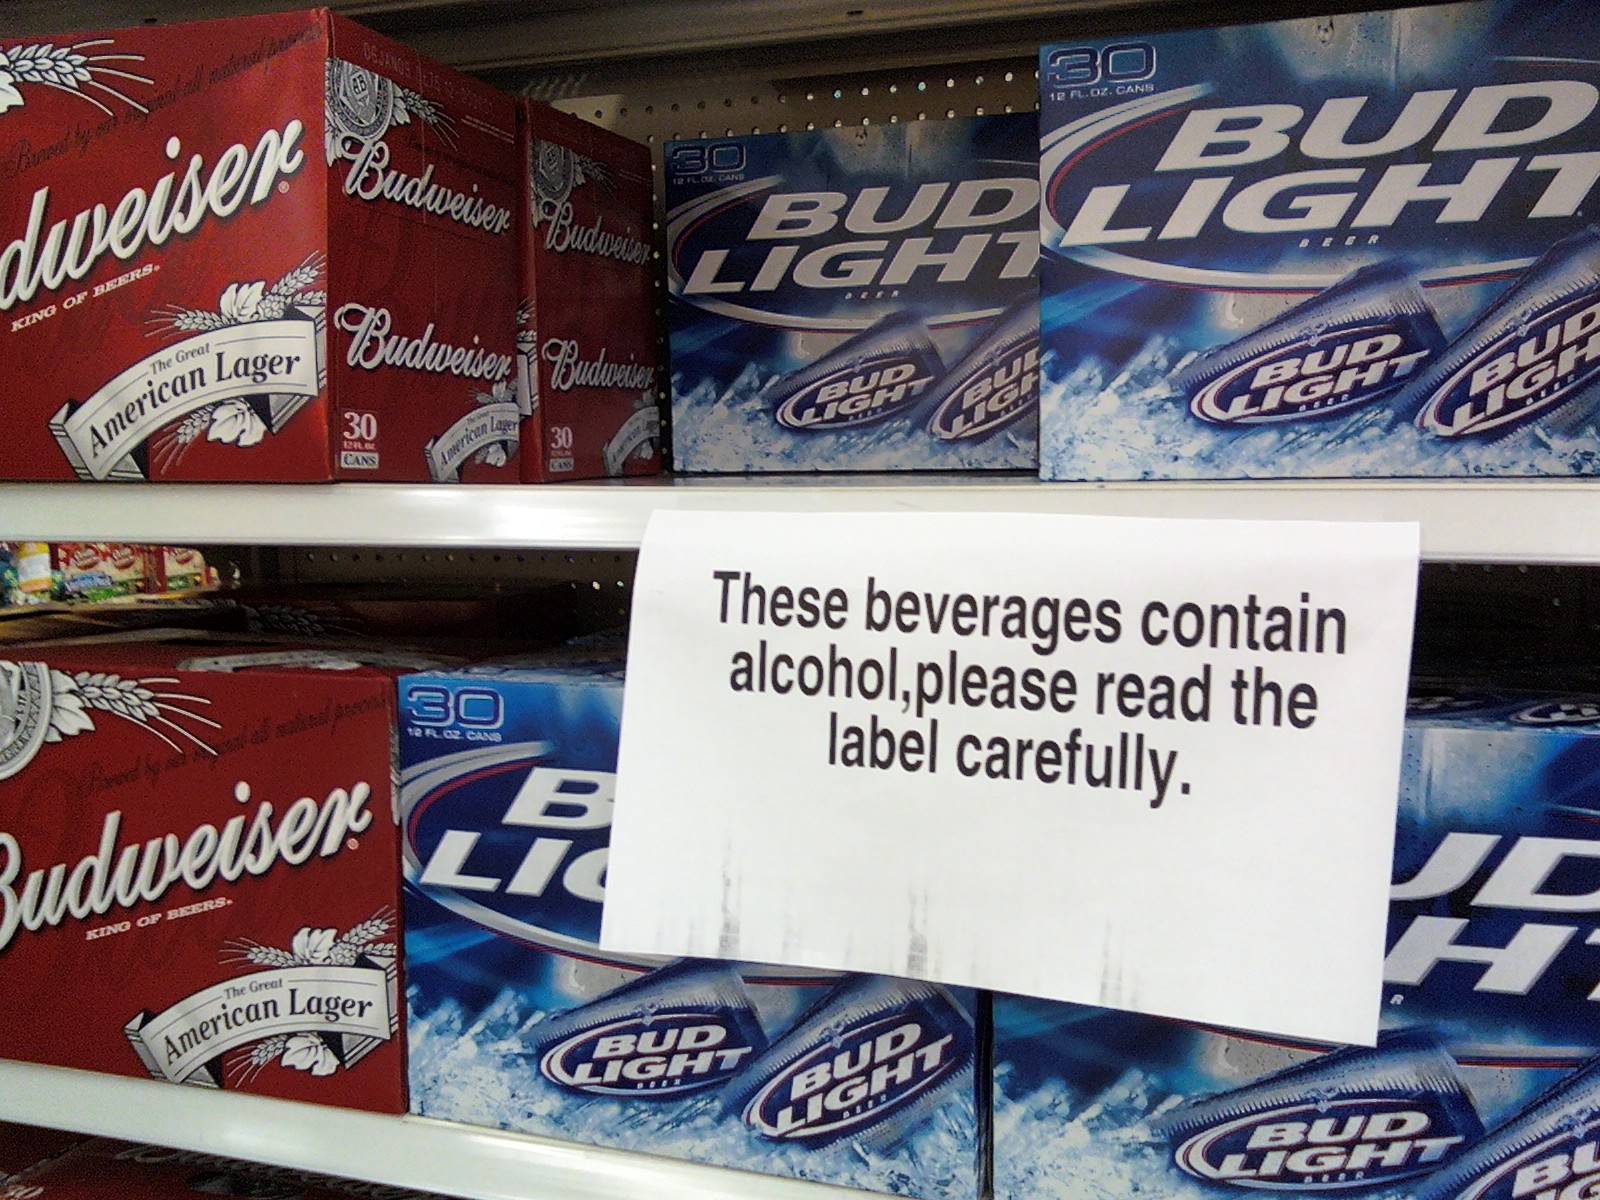 These beverages contain alcohol, please read the label carefully